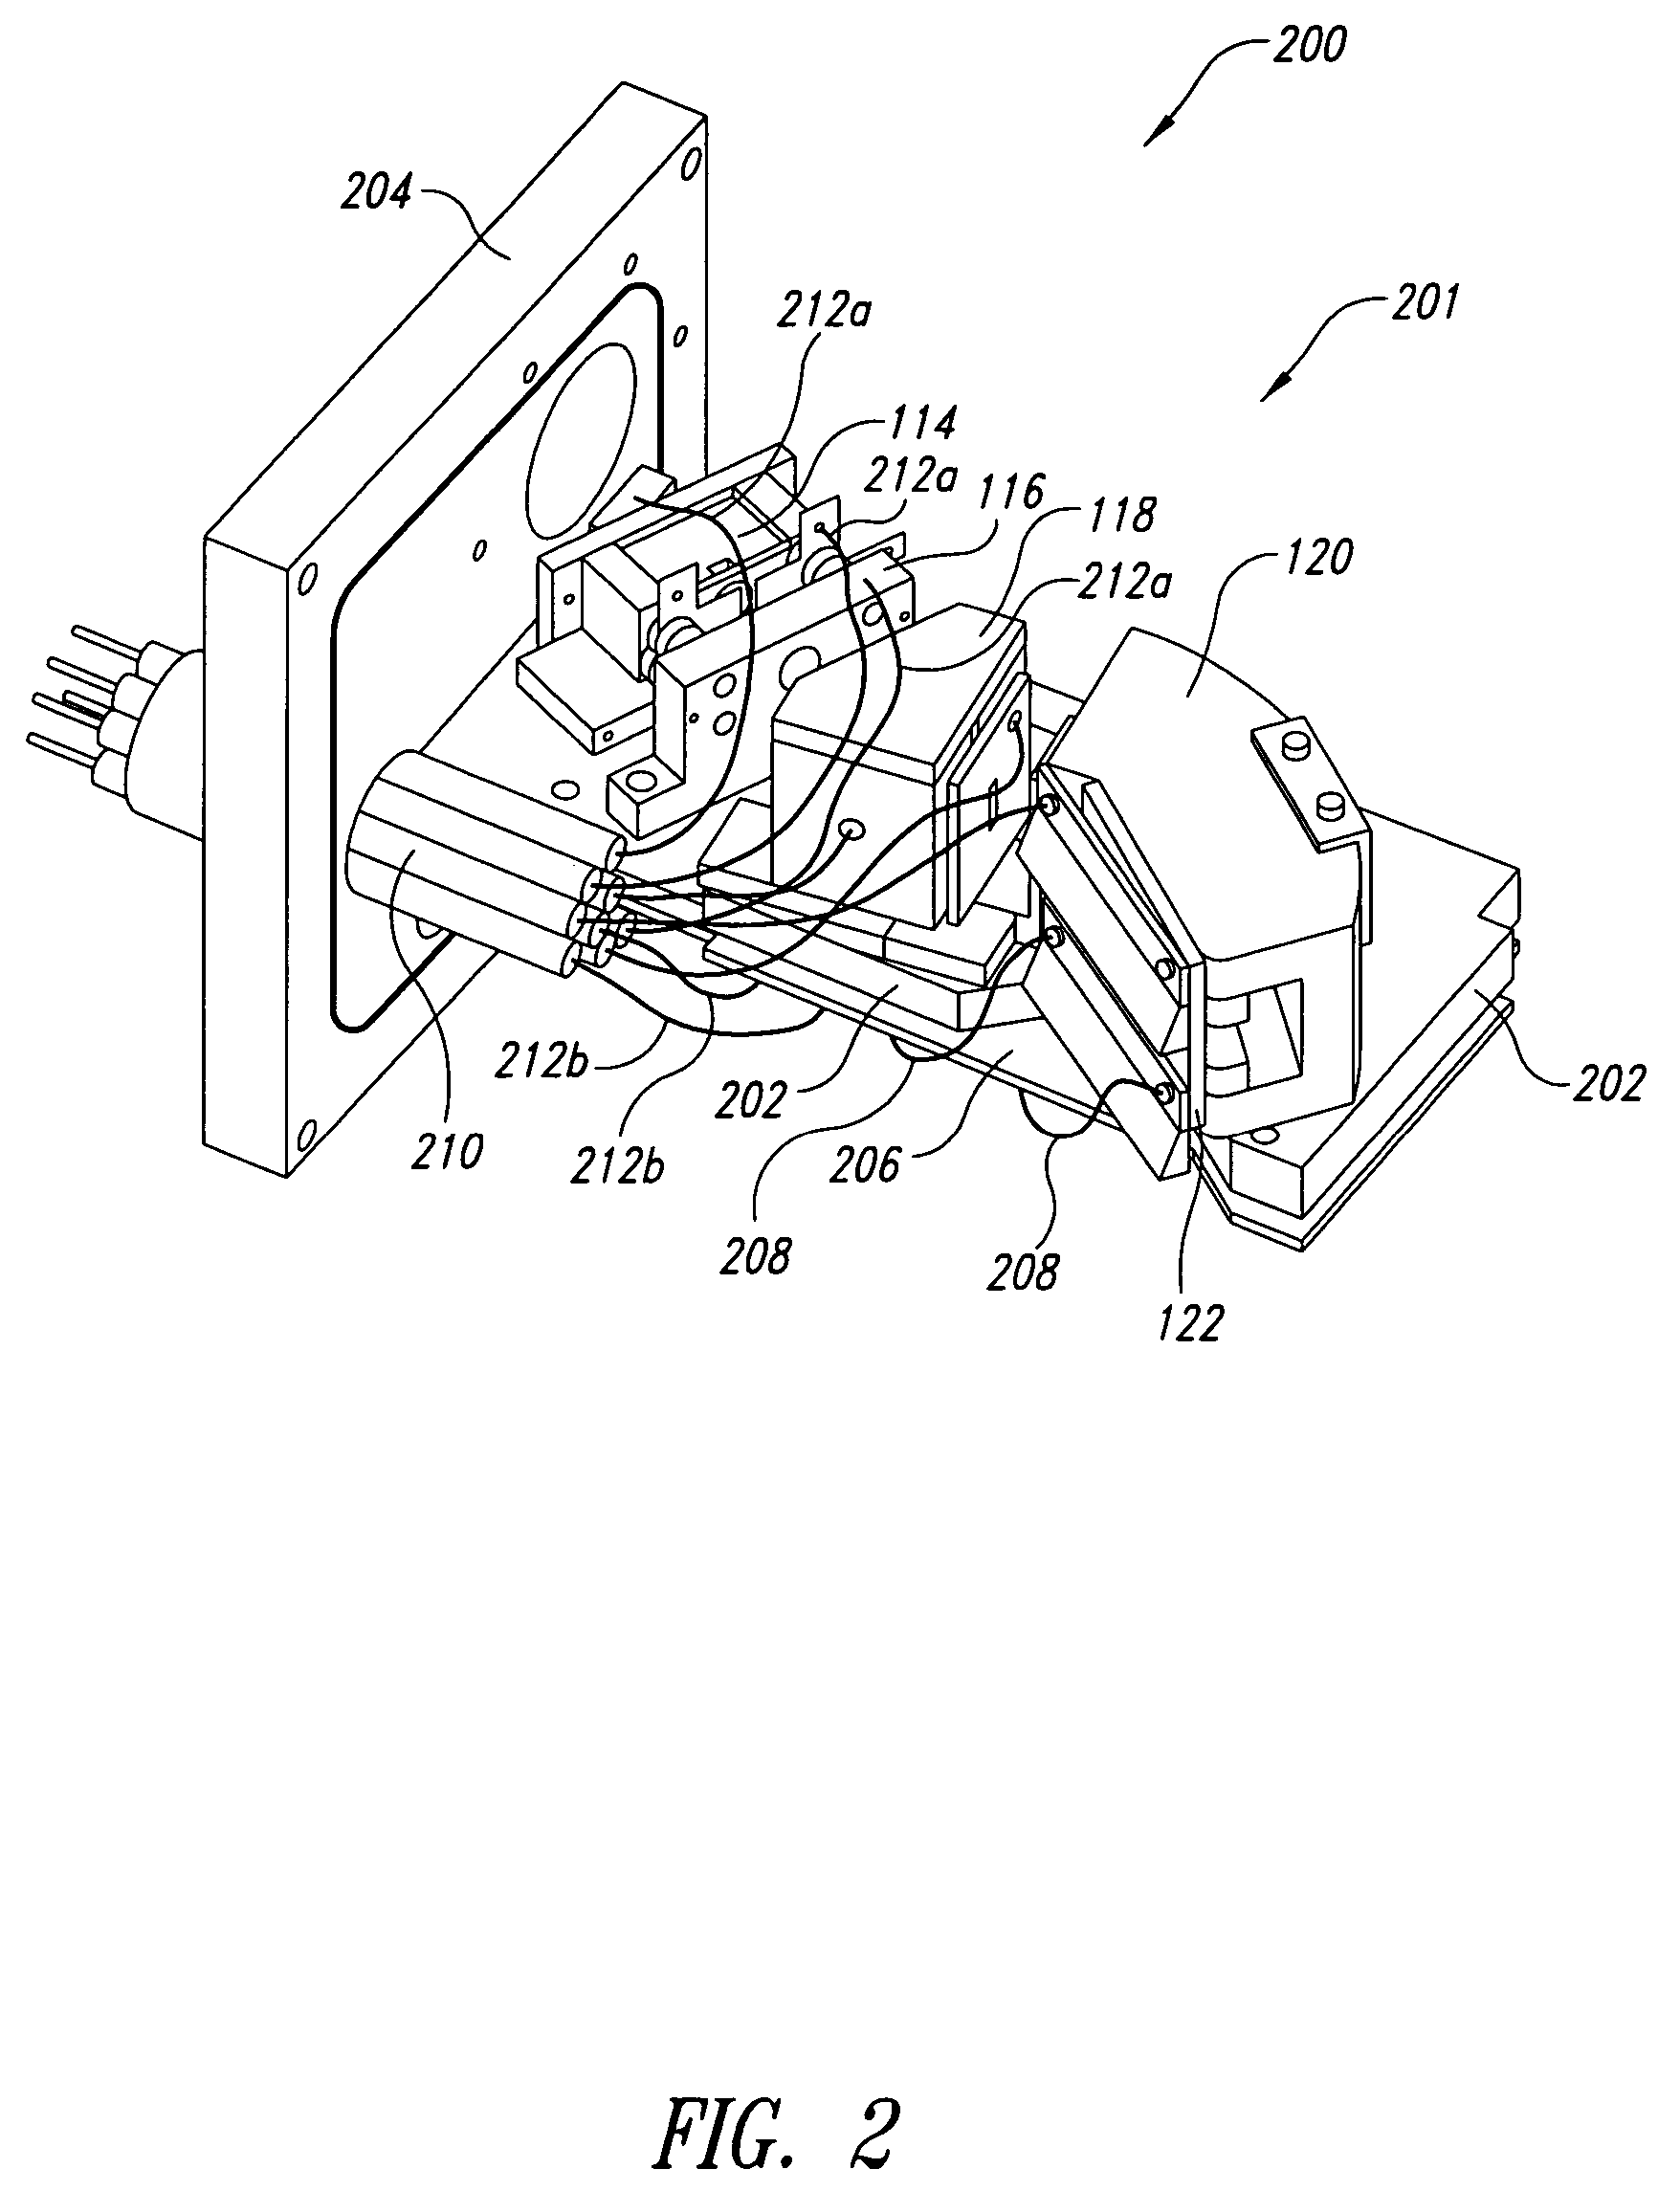 Optical bench for a mass spectrometer system